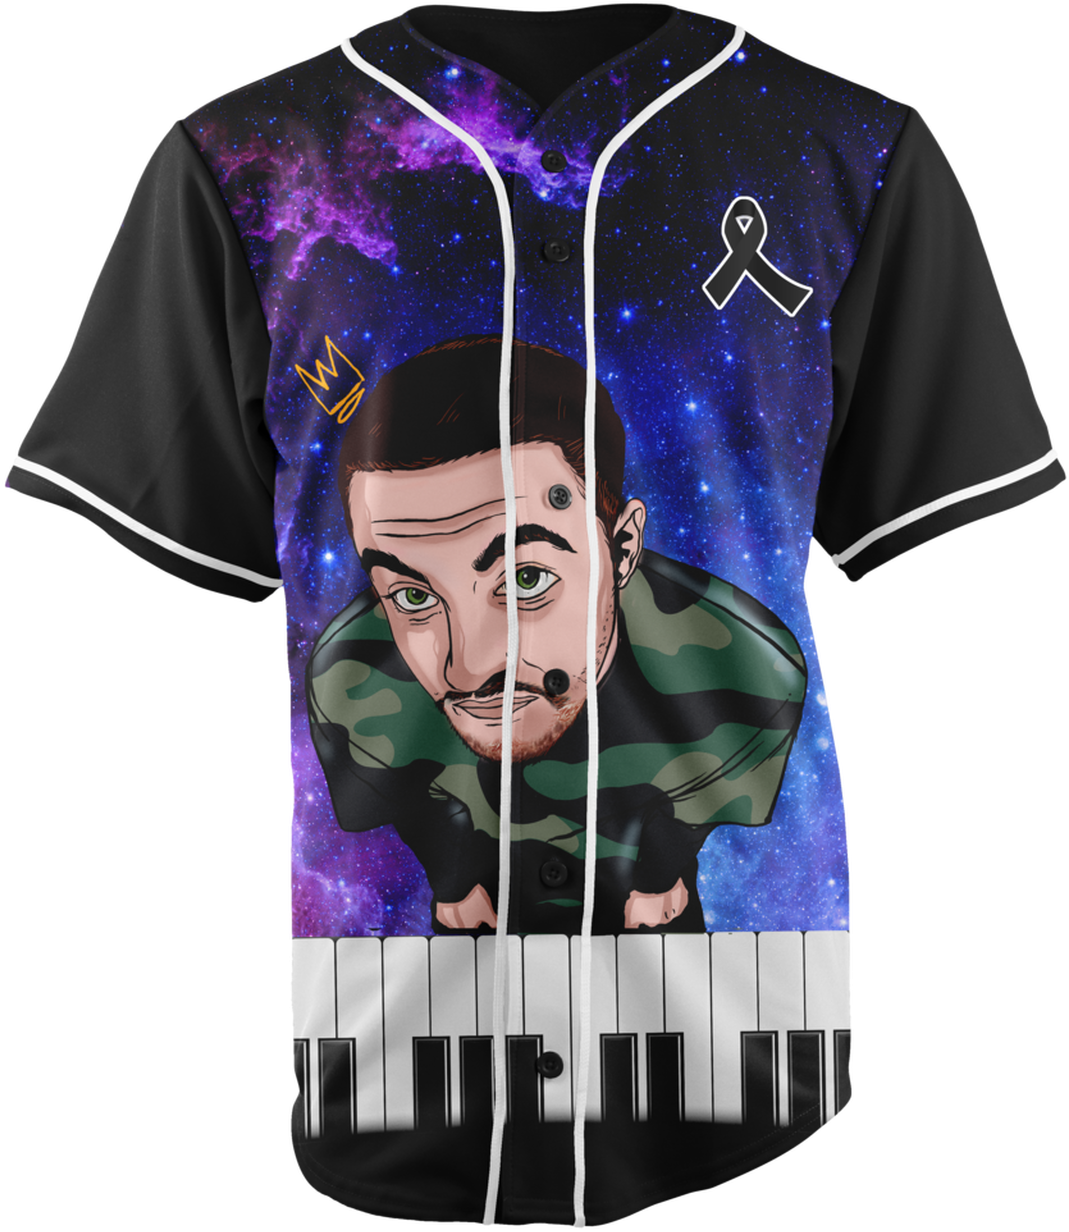 A Baseball Jersey With A Picture Of A Man On It